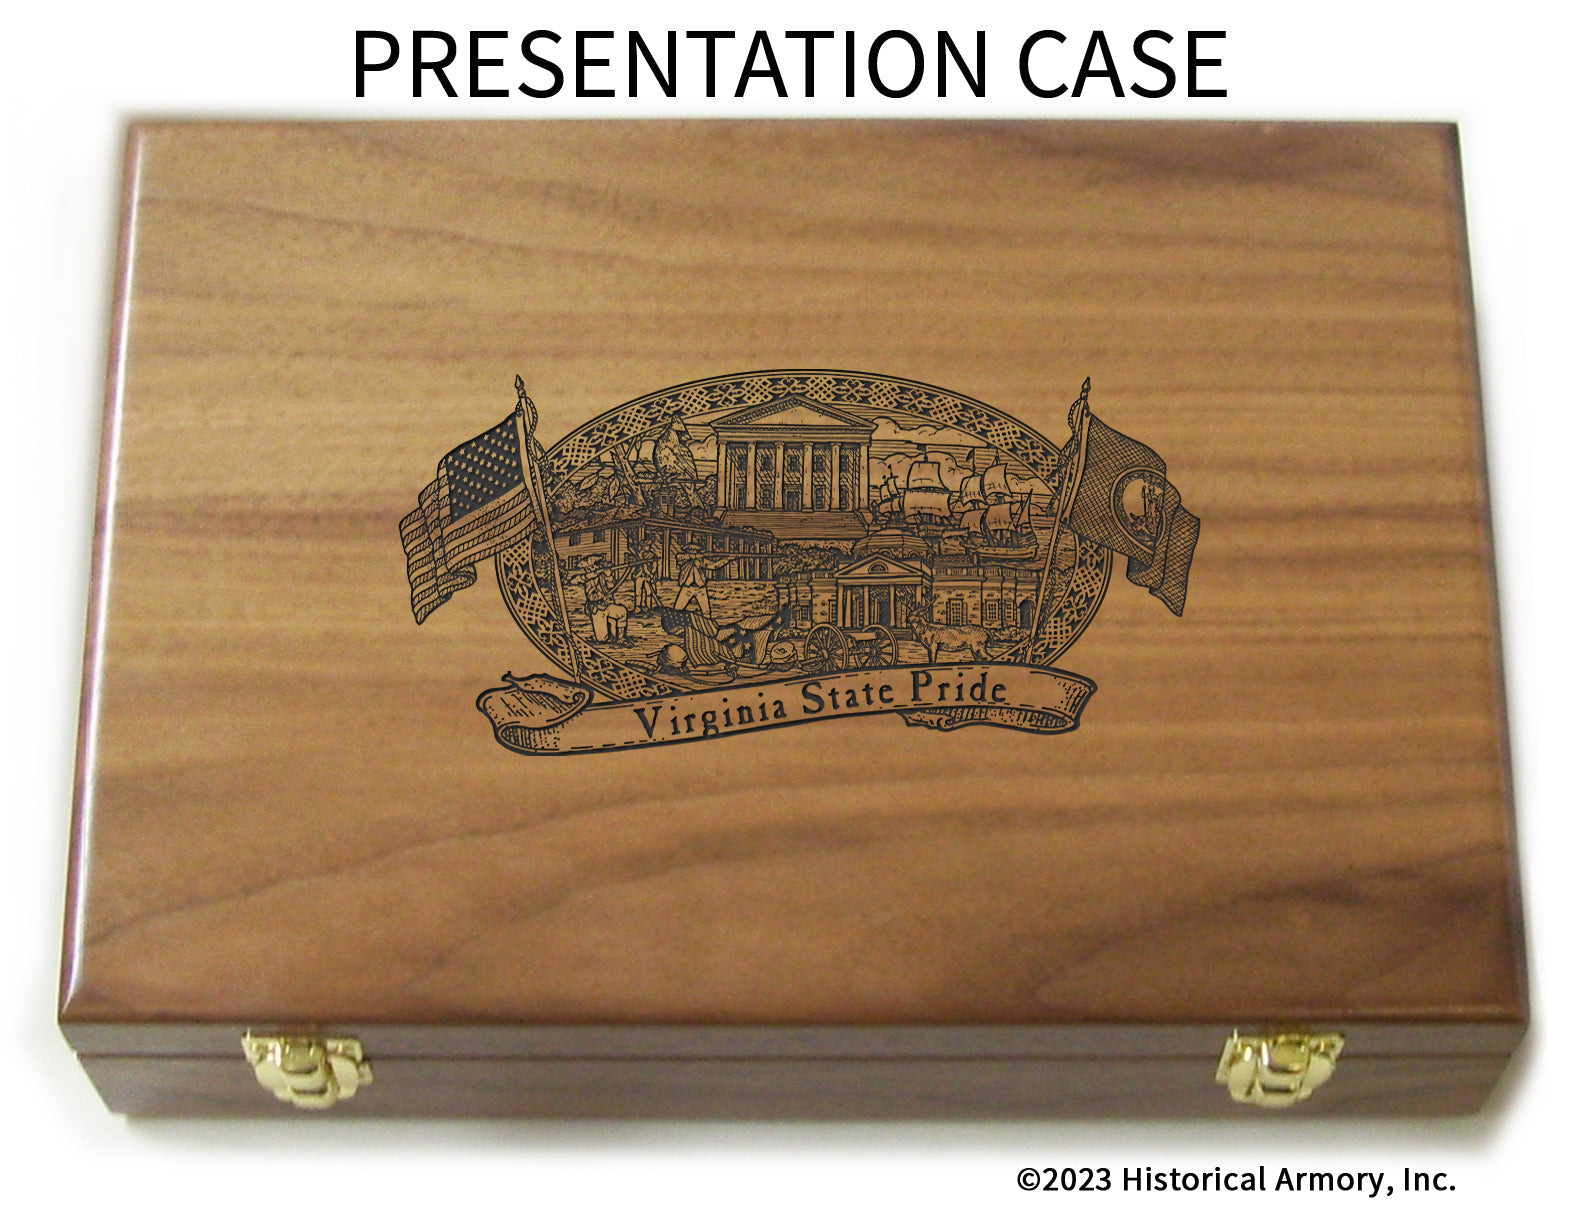 Virginia State Pride Limited Edition Engraved 1911 Presentation Case